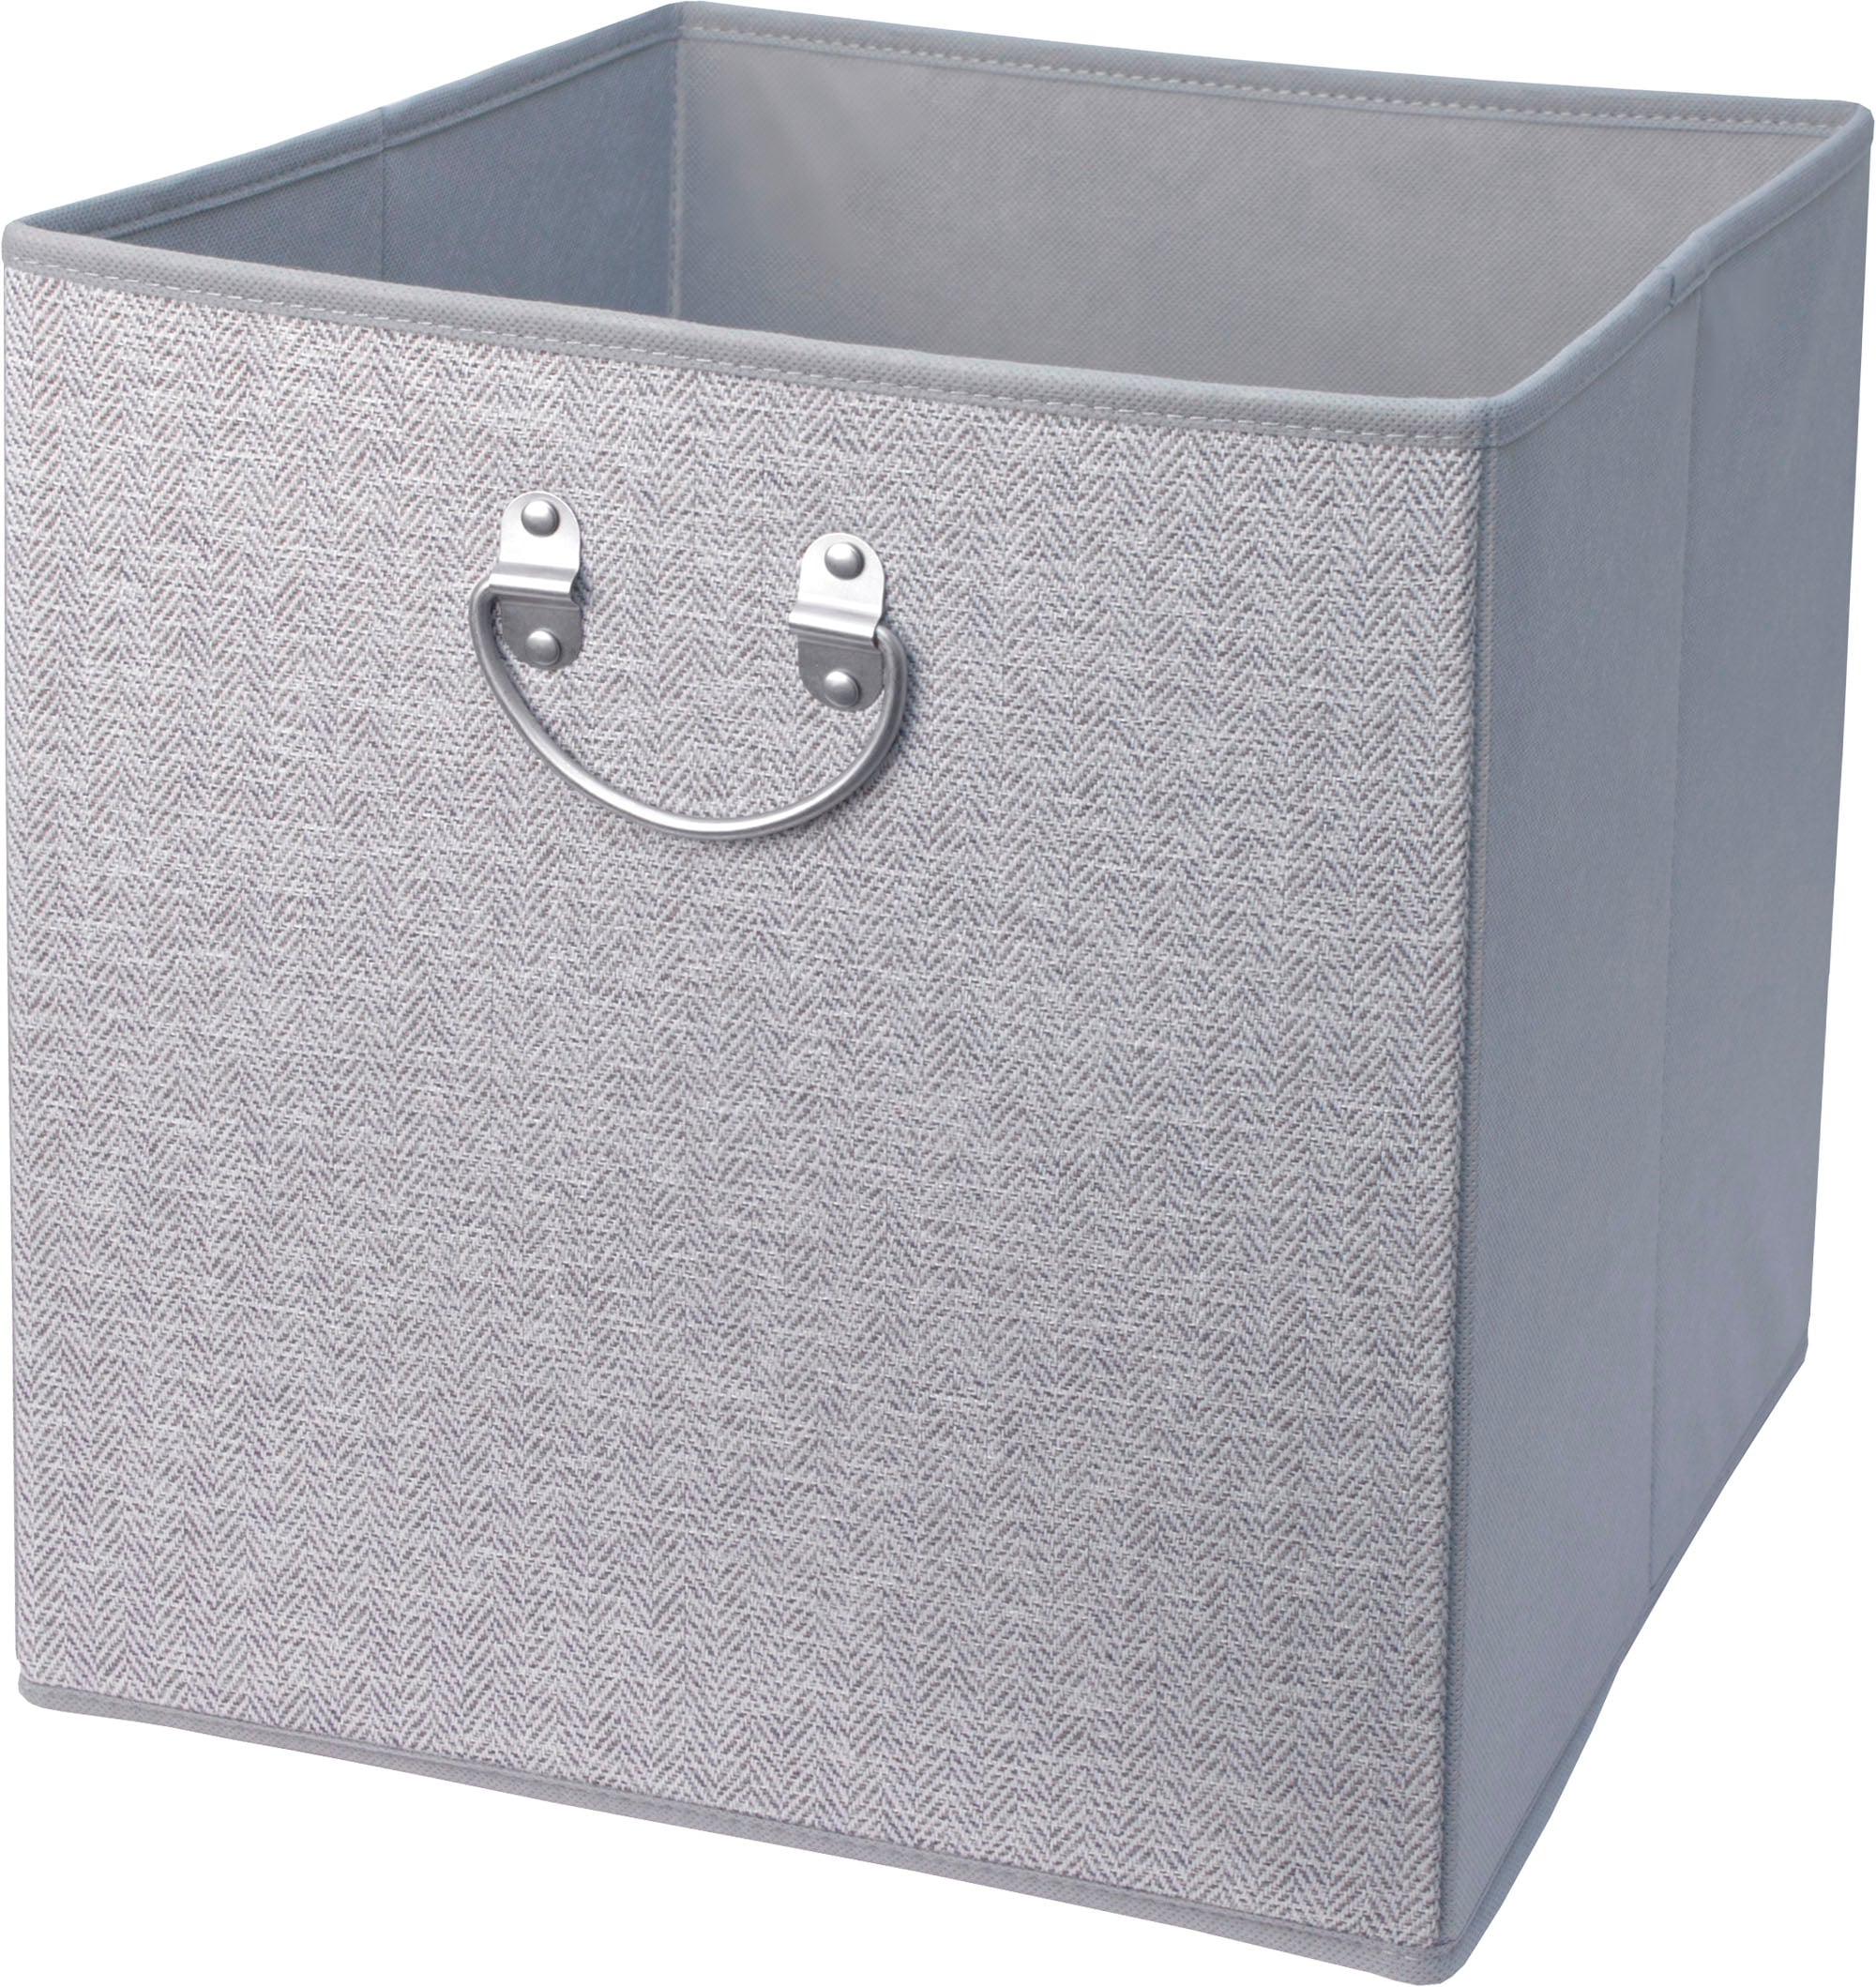 Hot Sales 8 Pack Foldable Non Woven Fabric Organization Boxes Bins  Collapsible Storage Cube - Buy Hot Sales 8 Pack Foldable Non Woven Fabric Organization  Boxes Bins Collapsible Storage Cube Product on